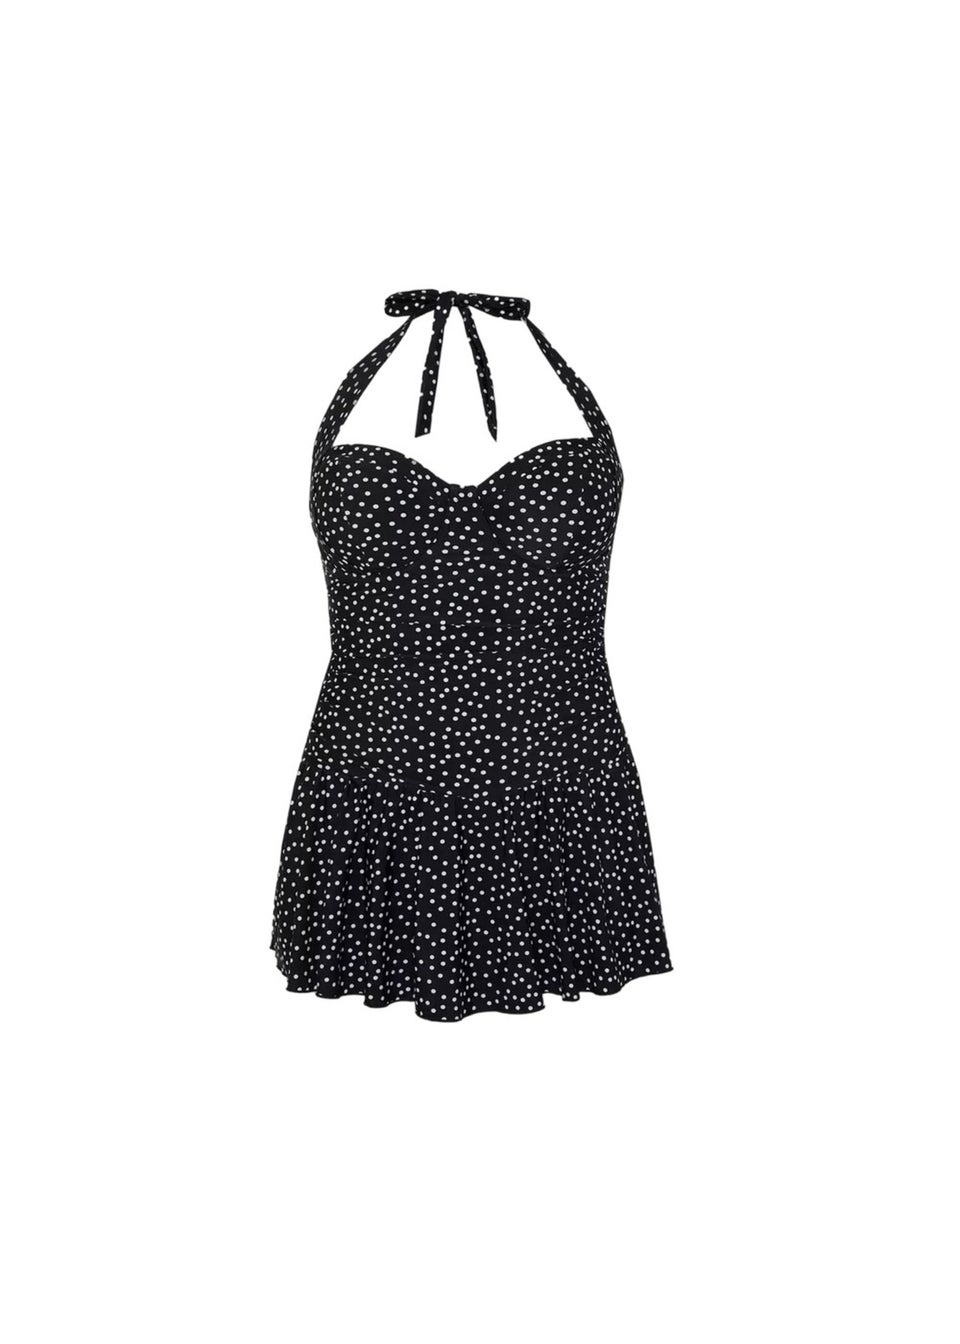 Gorgeous Black/White Spotted Skirted One Piece Swimsuit